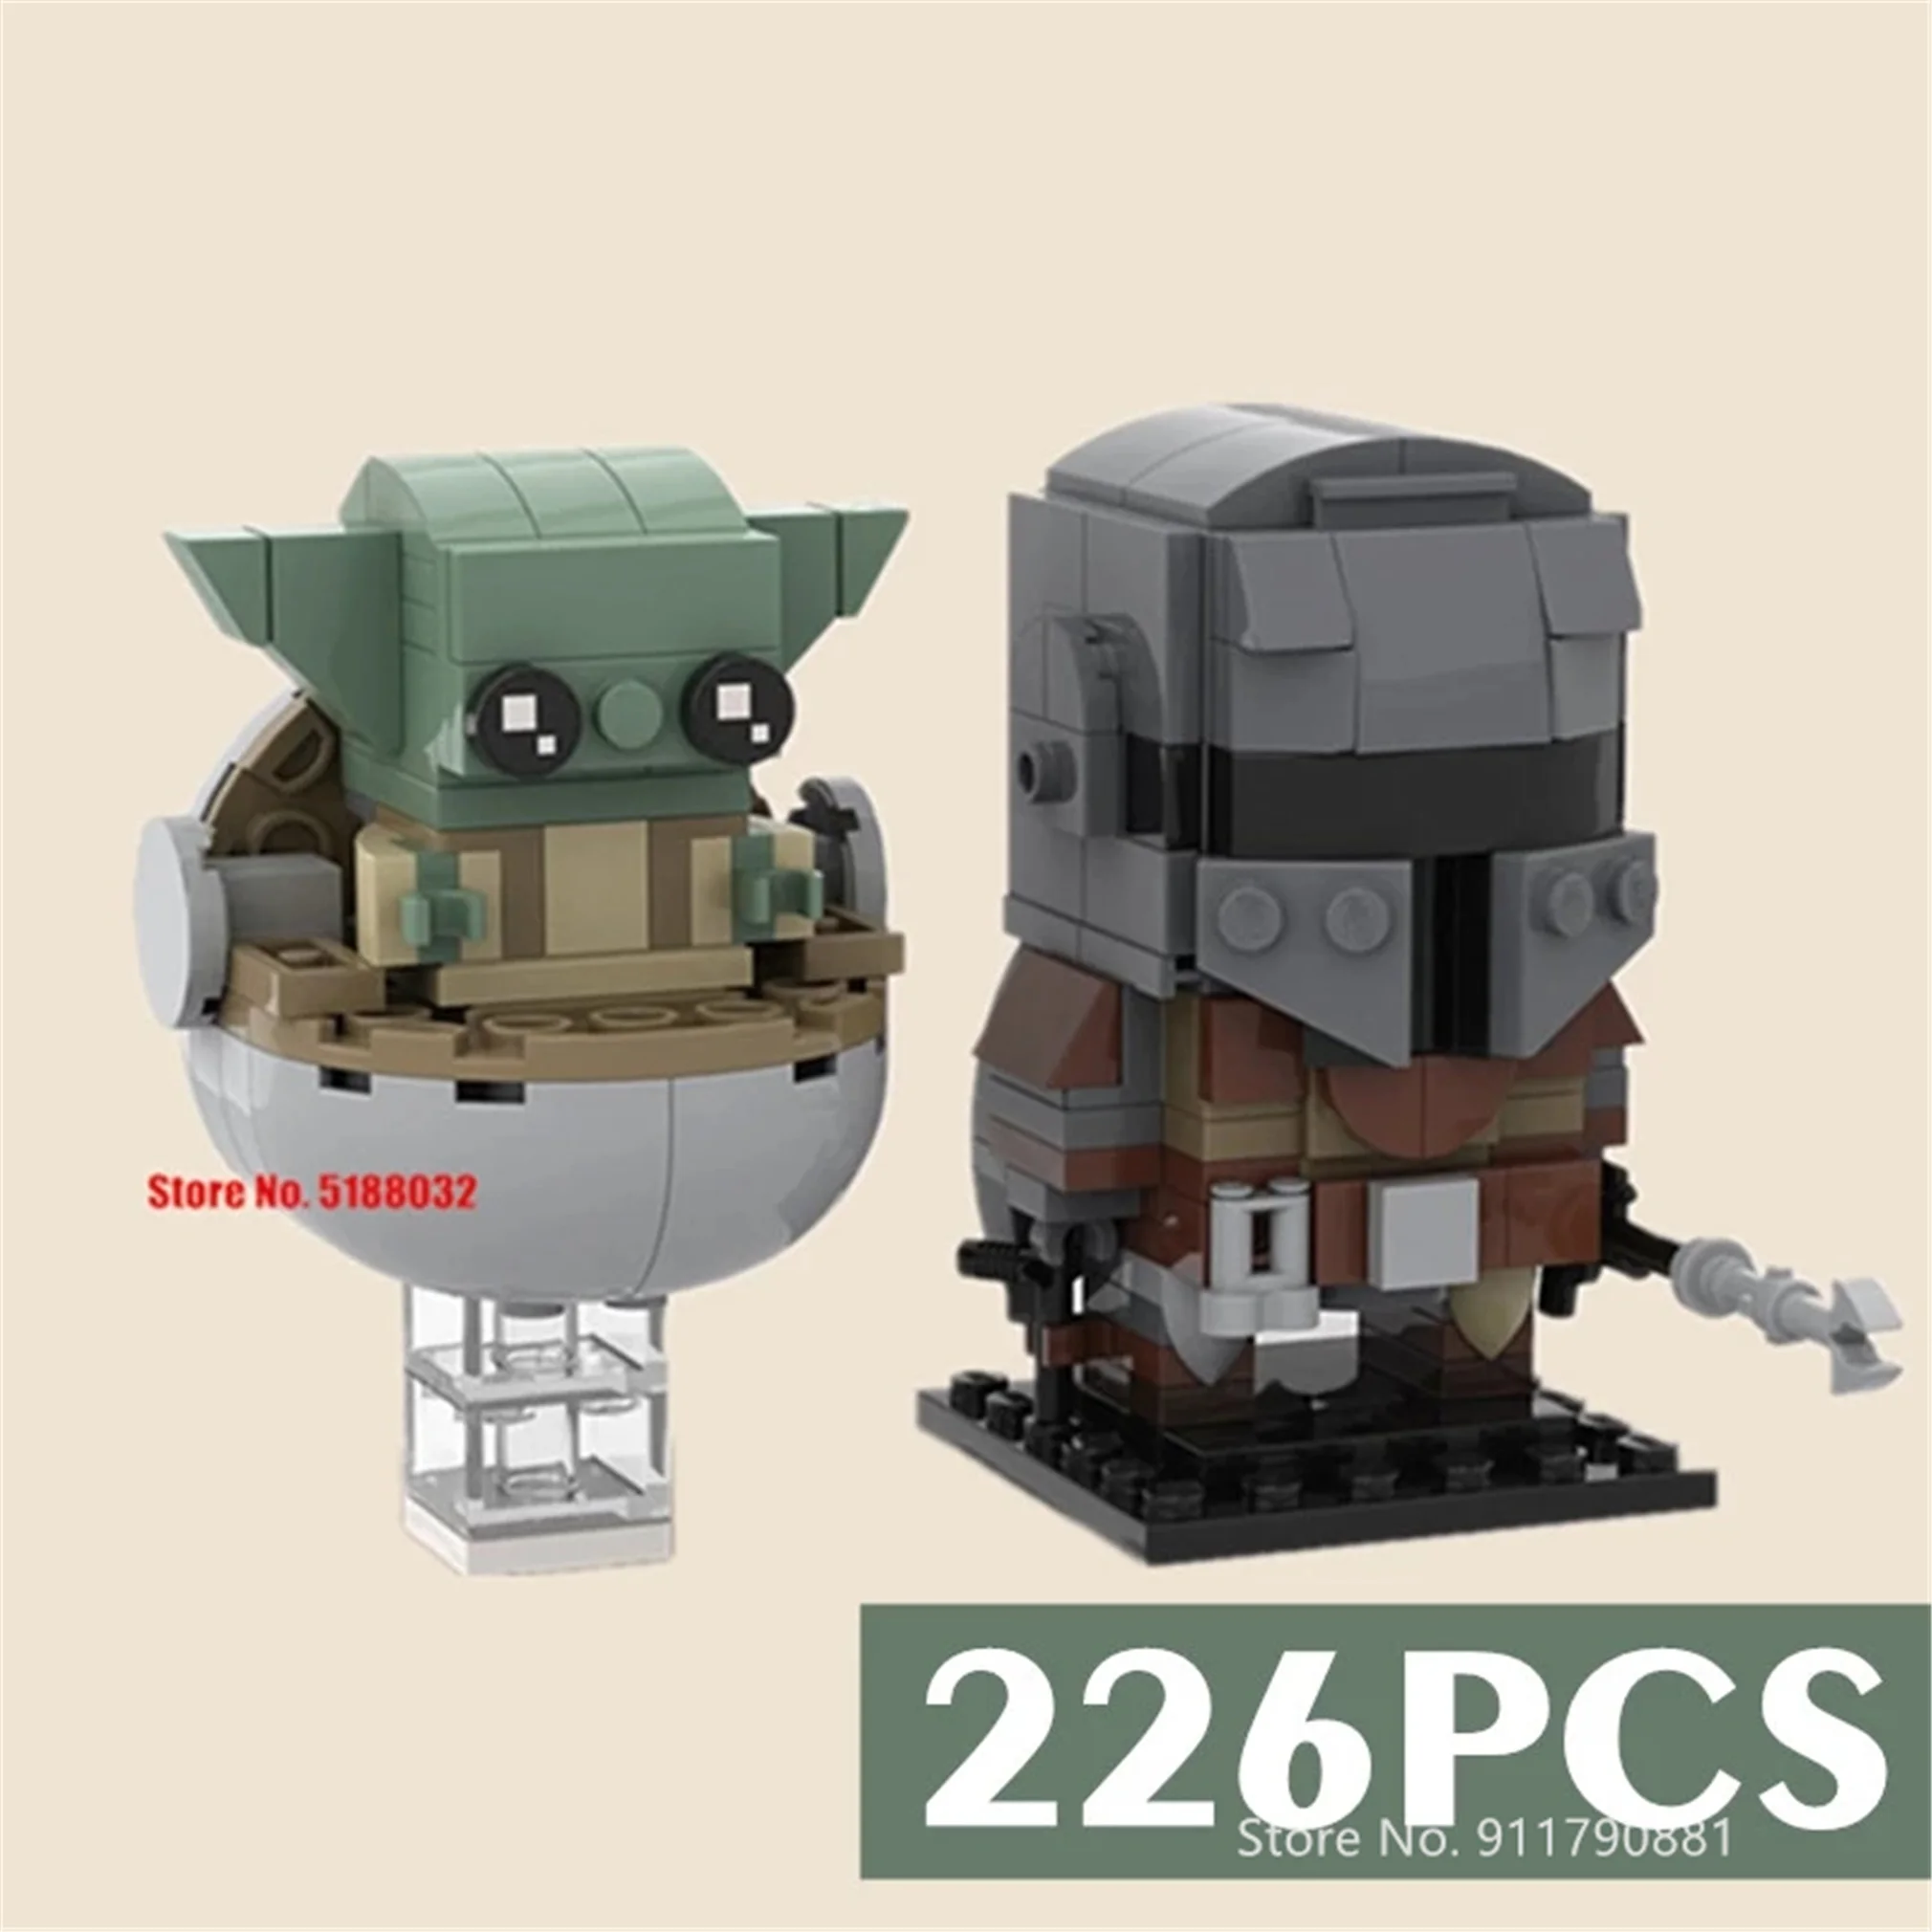 

Disney Around 226PCS Star Wars and Baby and Children's Assembly Toys Mandalori Blocks Diy Creative Christmas Gift for Children